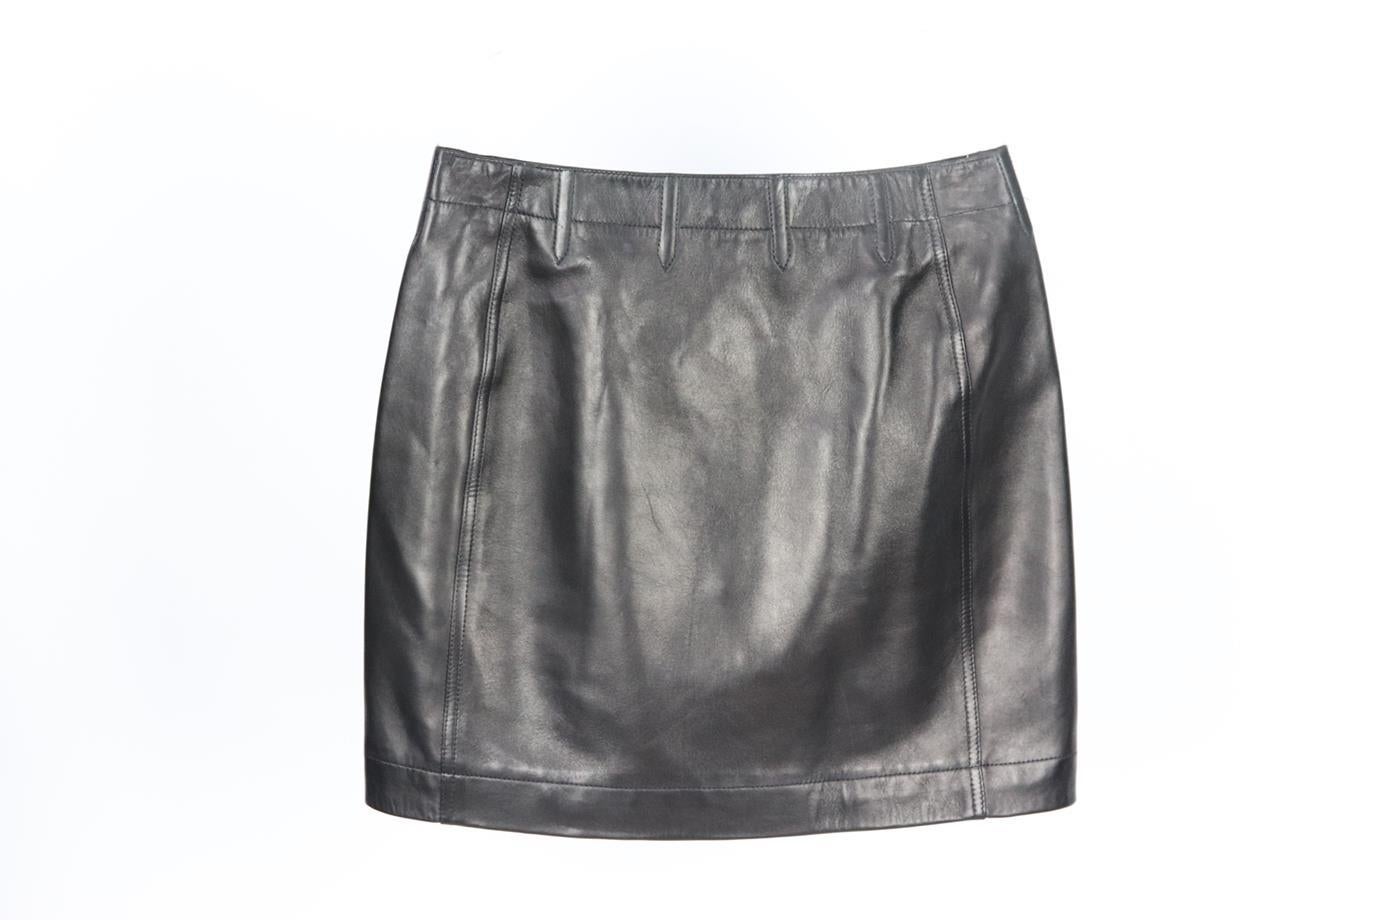 Azzedine Alaïa leather mini skirt. Black. Zip fastening at back. 100% Leather; lining: 100% polyester. Size: FR 38 (UK 10, US 6, IT 42). Waist: 24 in. Hips: 33.5 in. Length: 14.5 in. Very good condition - No sign of wear; see pictures.